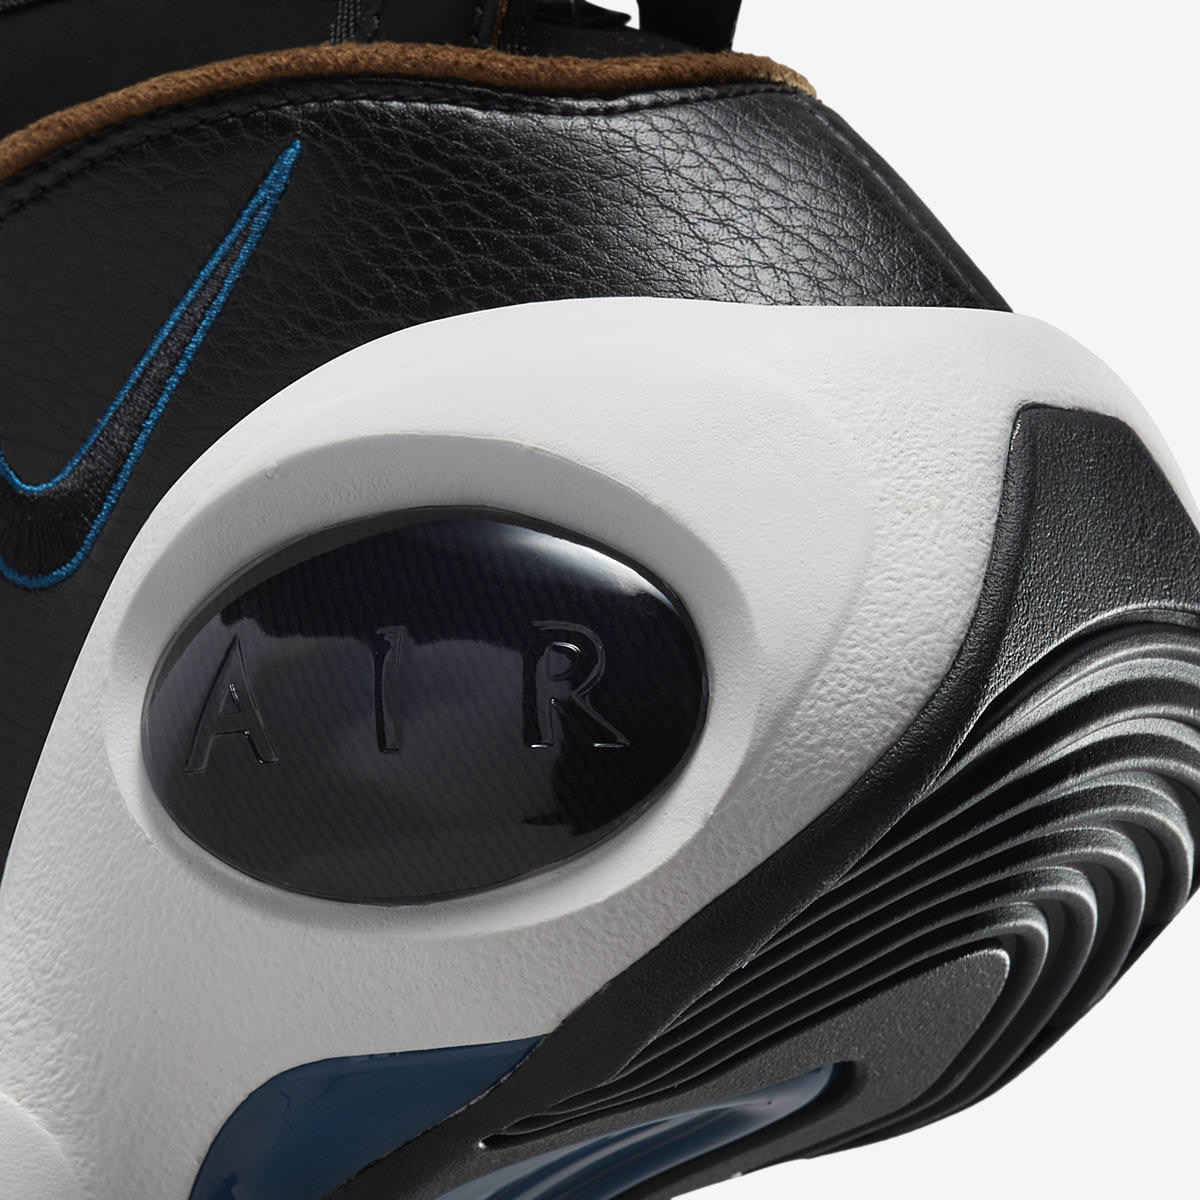 nike zoom rookie white and silver shoes black Black Valerian Blue Ale Brown DV6994-001 Release Date